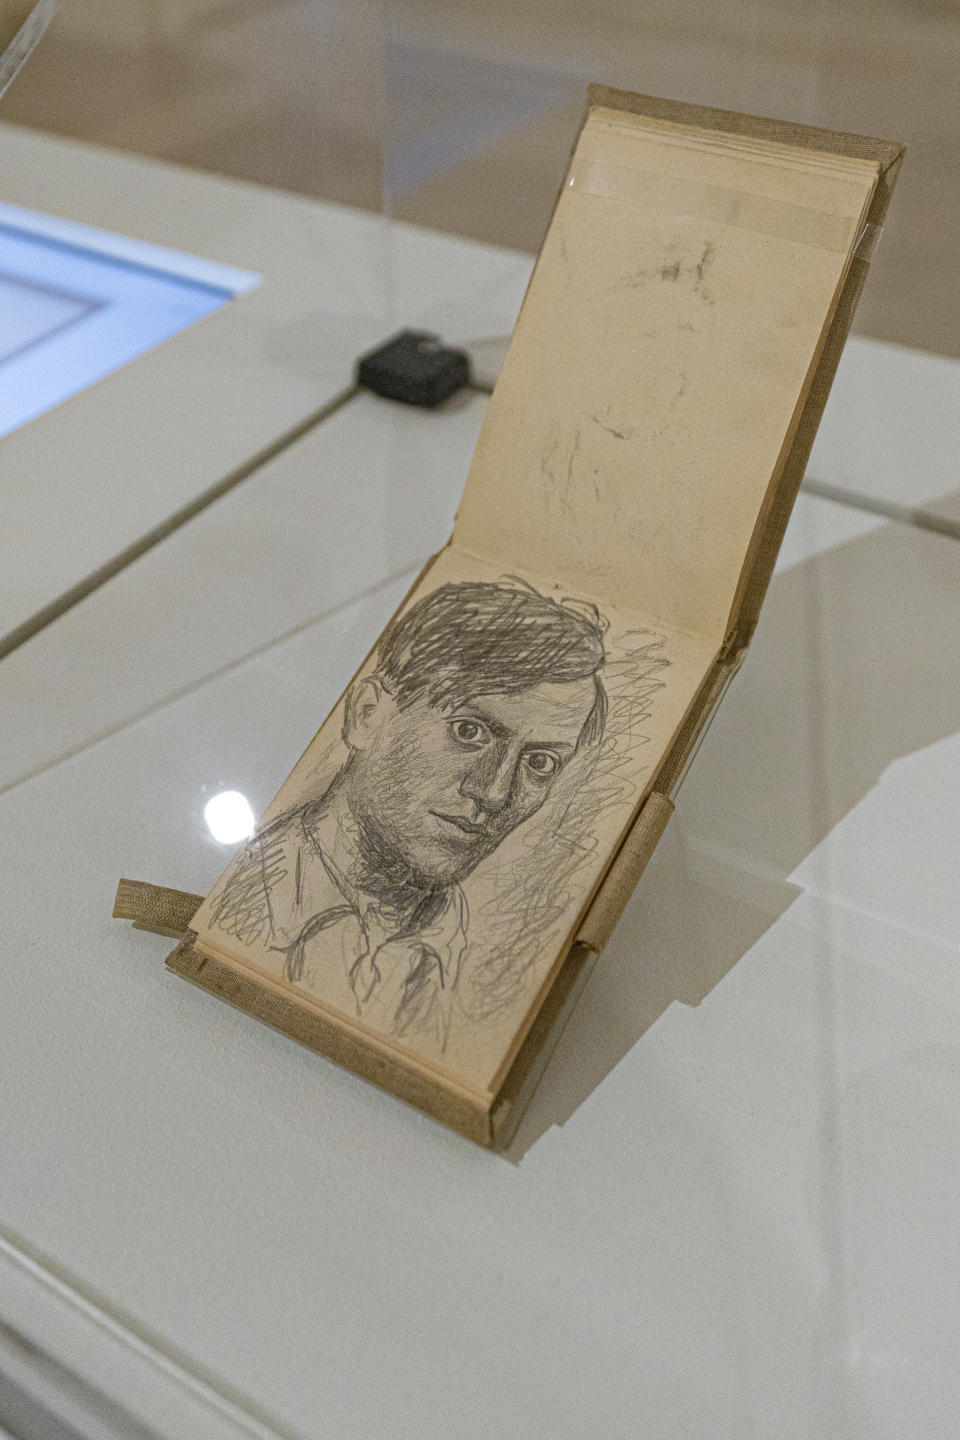 CARNET 214, part of the Picasso: 14 Sketchbooks exhibit, is displayed at Pace Gallery in New York, Thursday, Nov. 9, 2023. (AP Photo/Peter K. Afriyie)